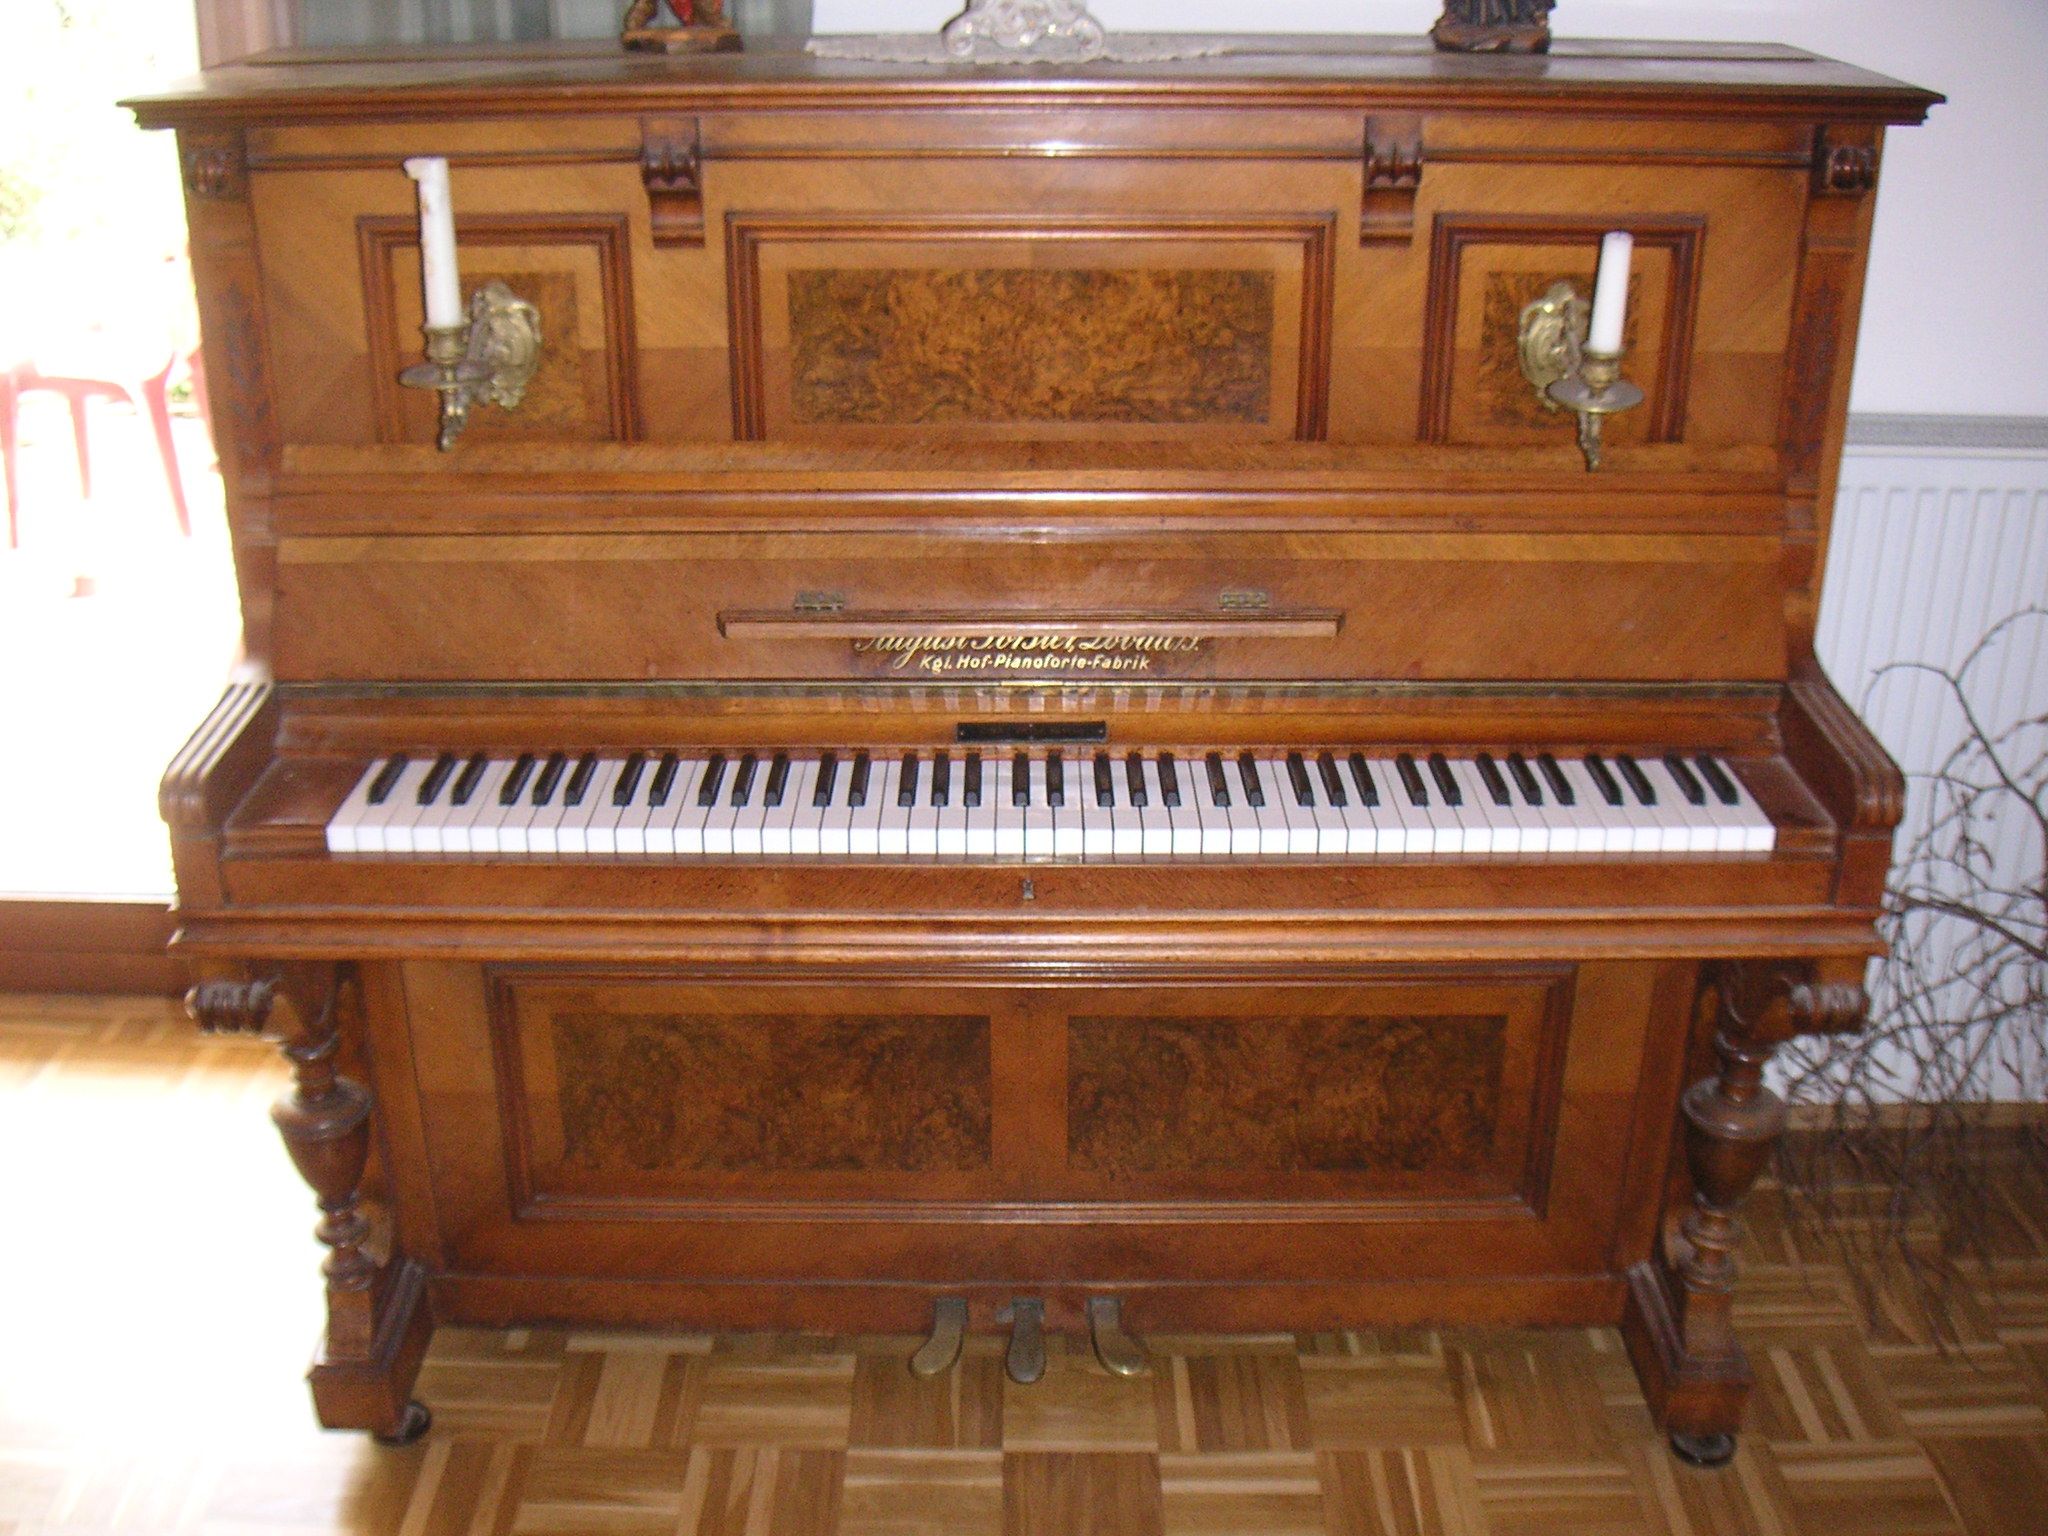 August Förster upright piano - spinet piano - Google Search | Art ...